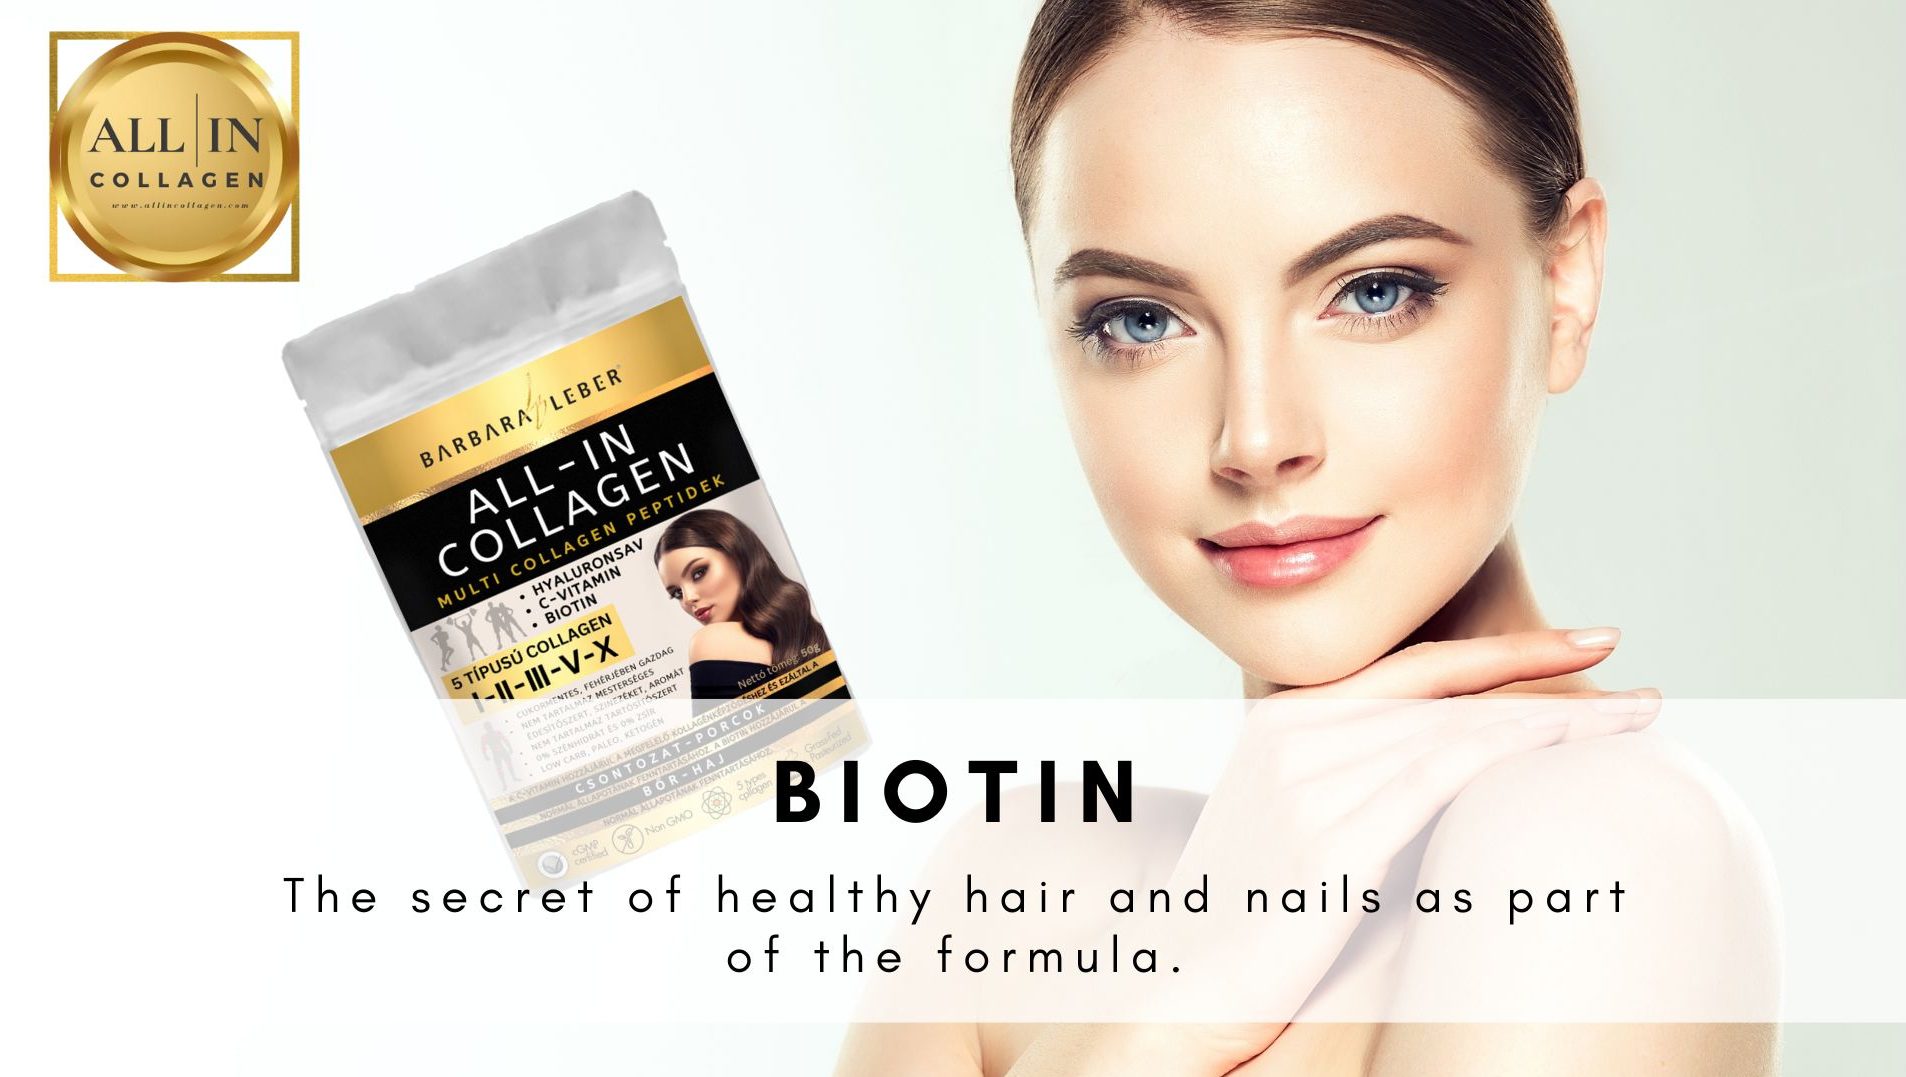 Why BIOTIN is important for our beauty.